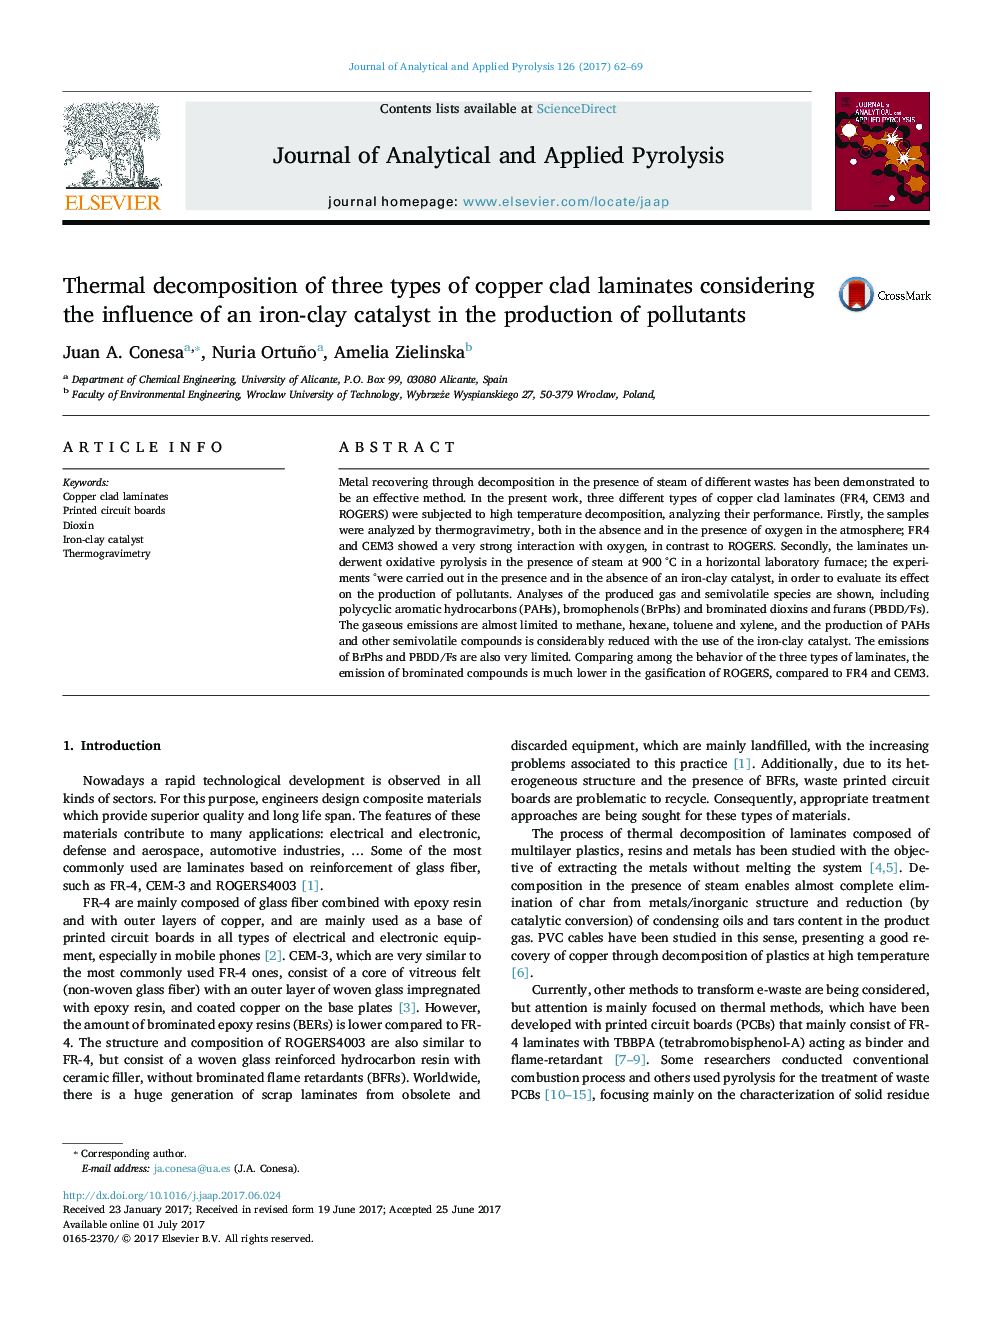 Thermal decomposition of three types of copper clad laminates considering the influence of an iron-clay catalyst in the production of pollutants